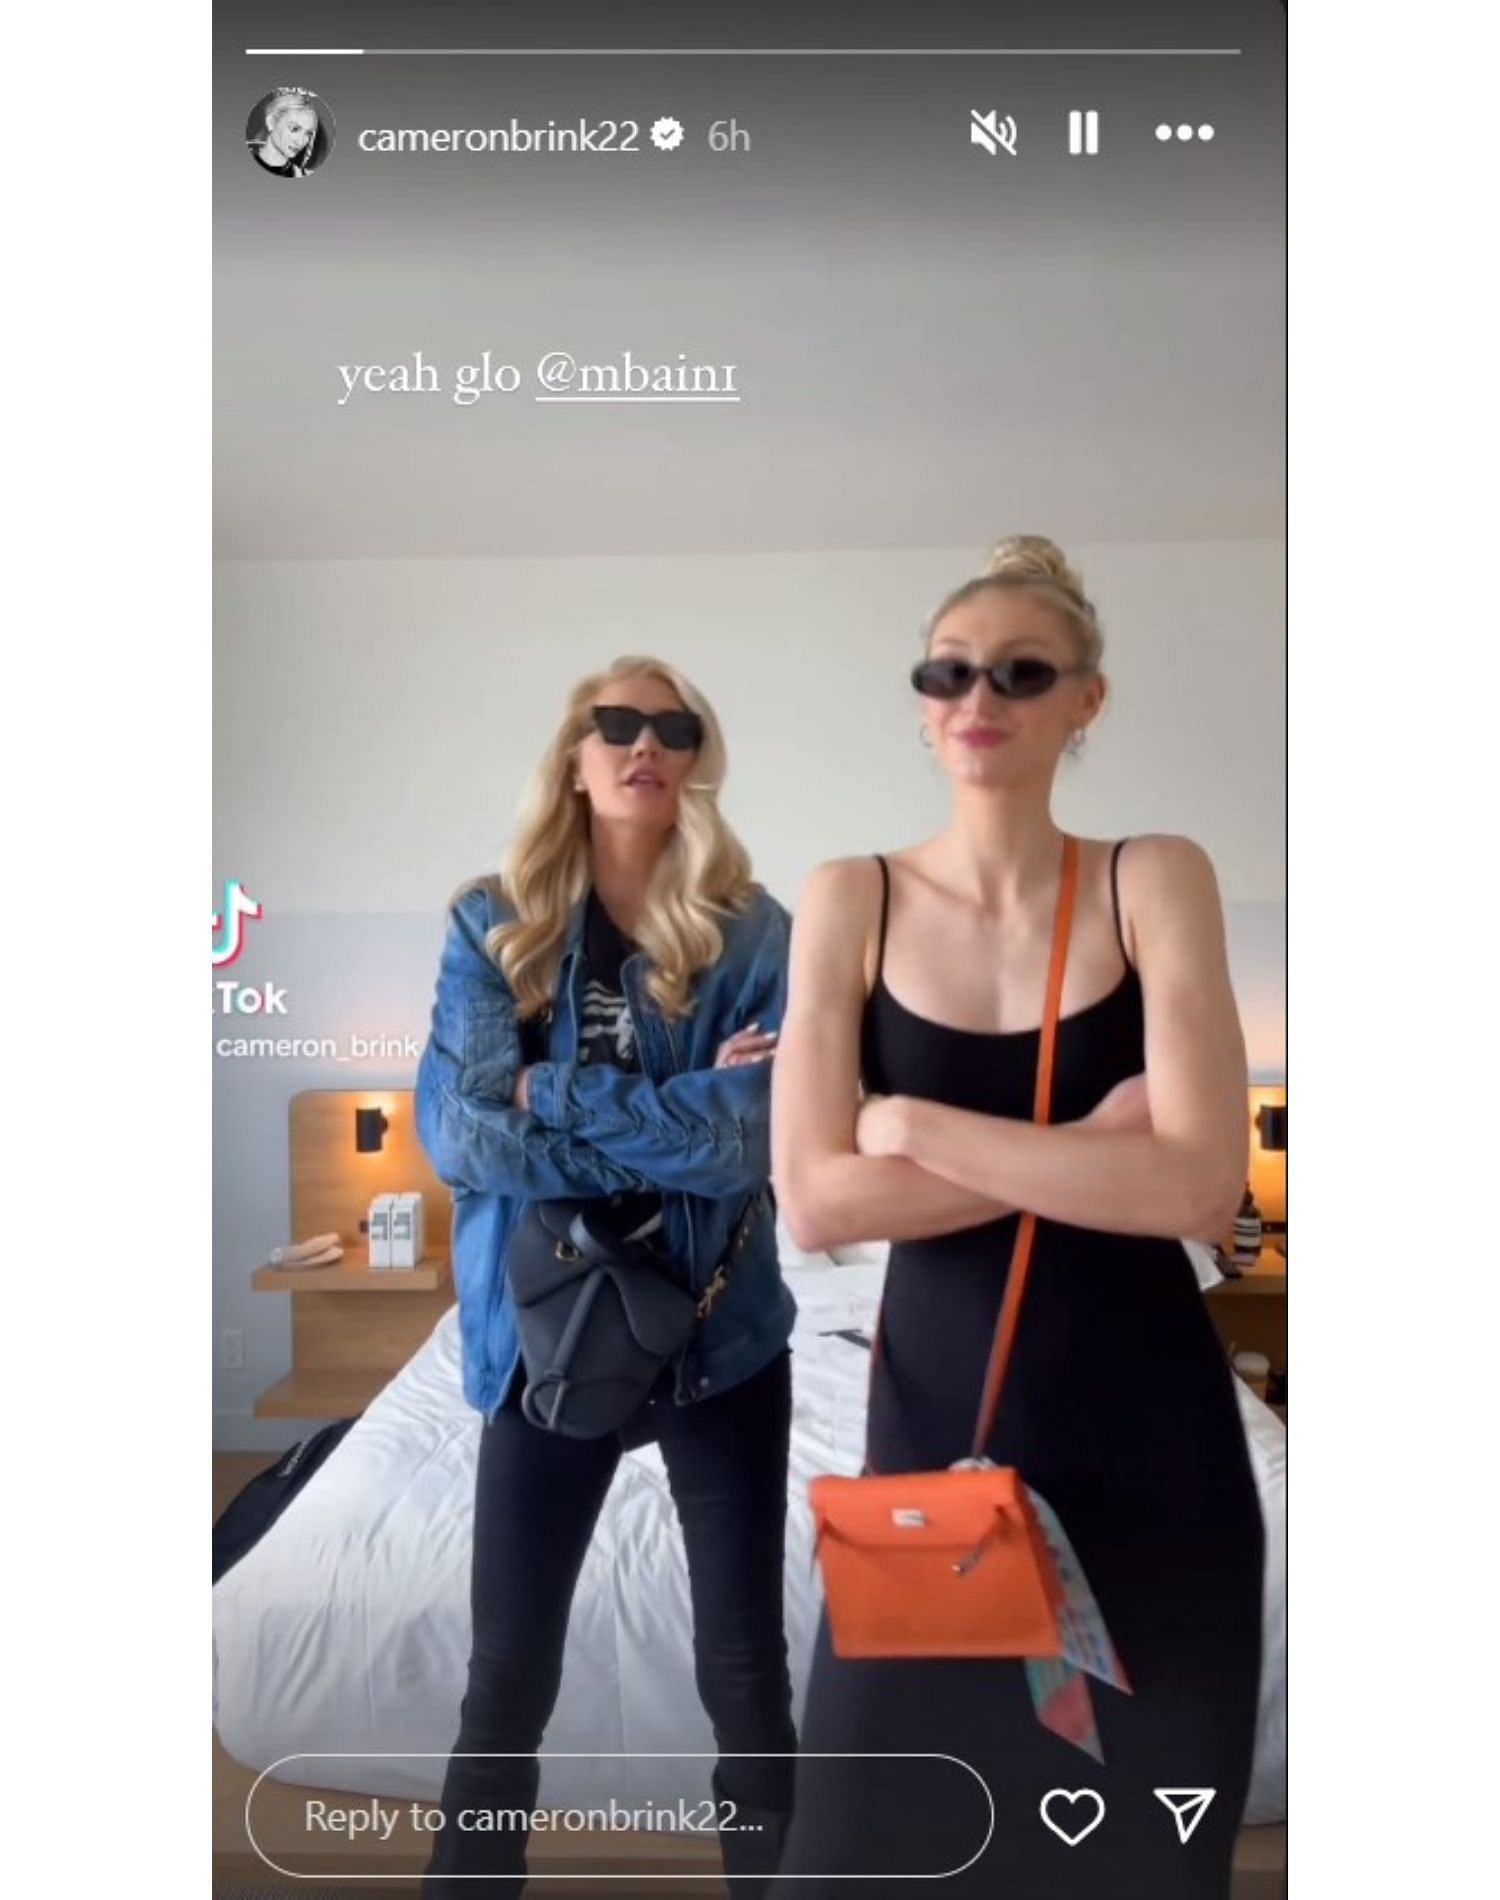 Cameron Brink having fun with her mom Michelle on TikTok while she rocks an $8,600 Hermes bag.